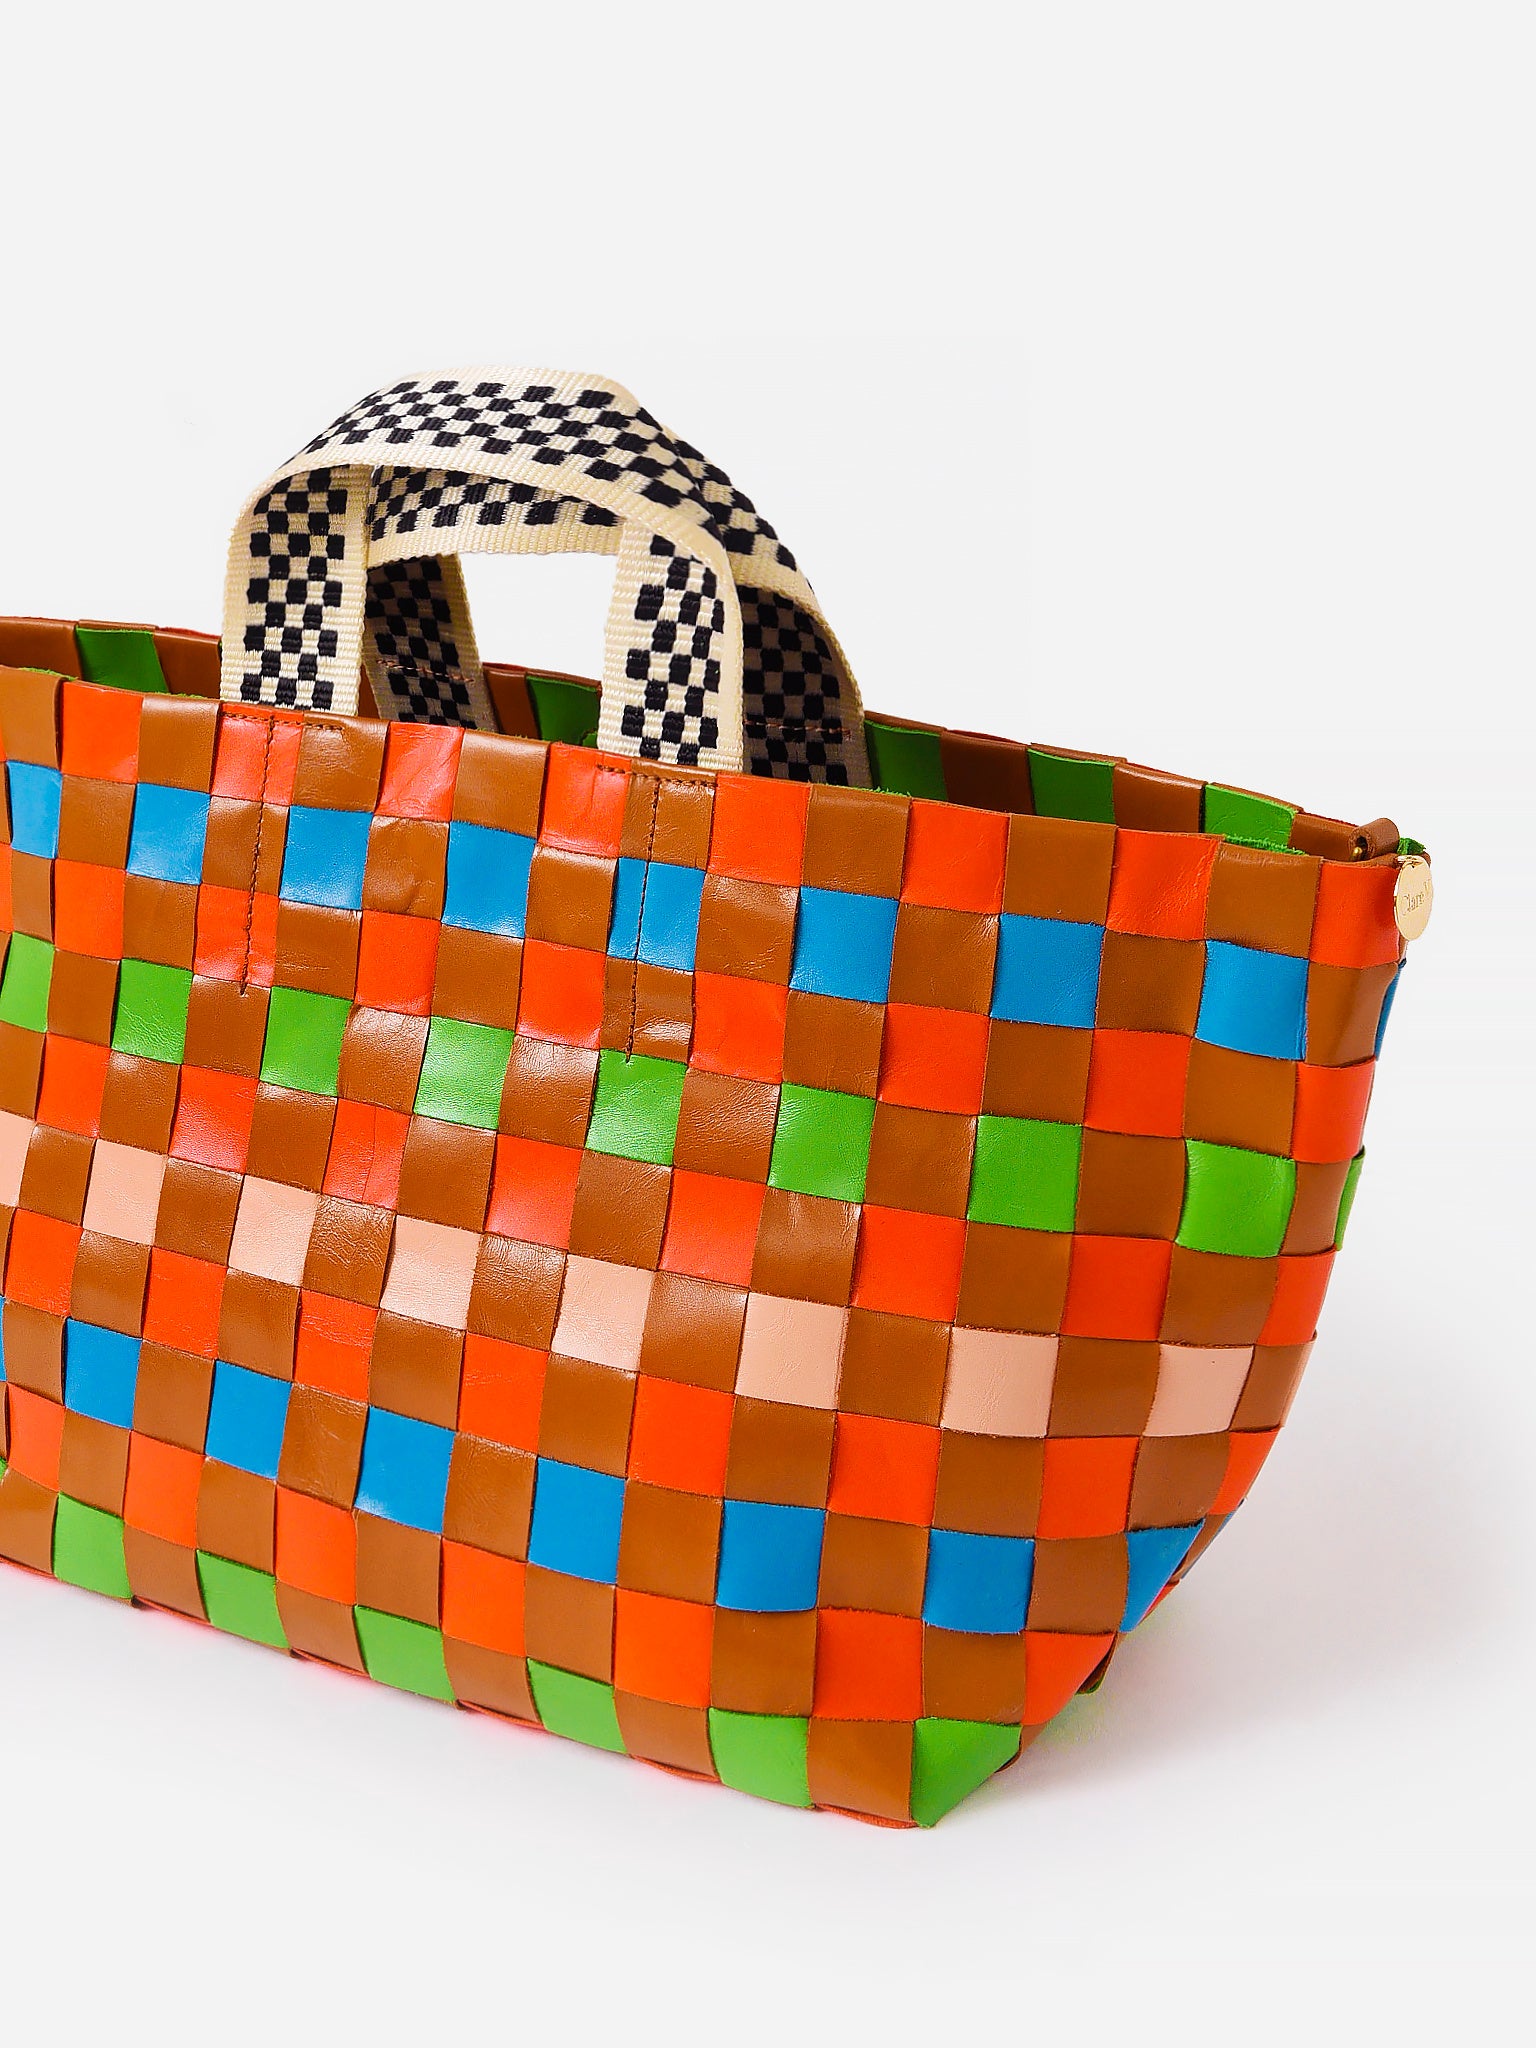 Clare V. - Bateau Tote in Natural and Blood Orange with Multi